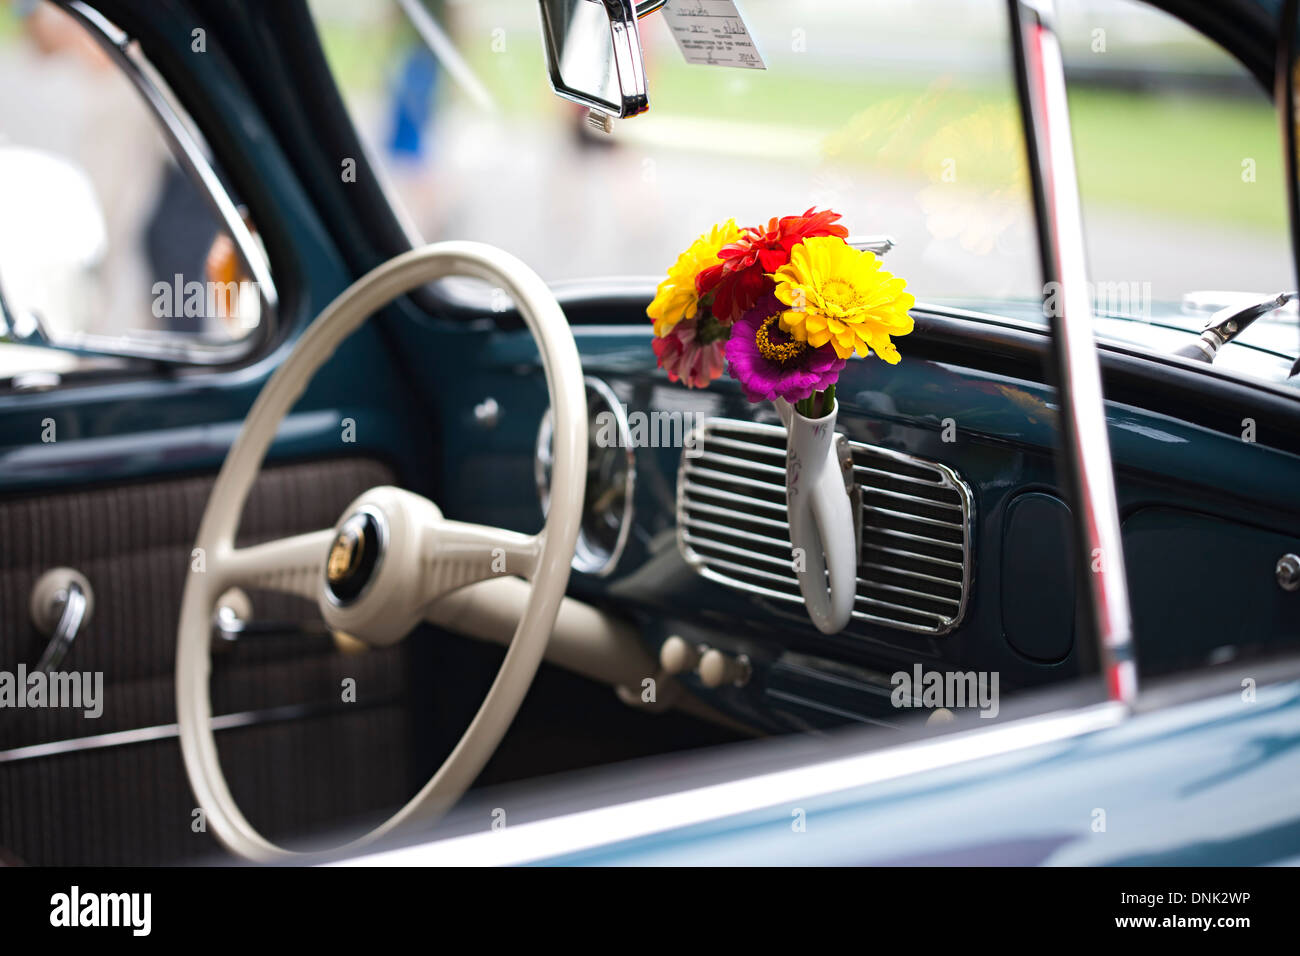 Interior of a vintage VW Beetle Stock Photo